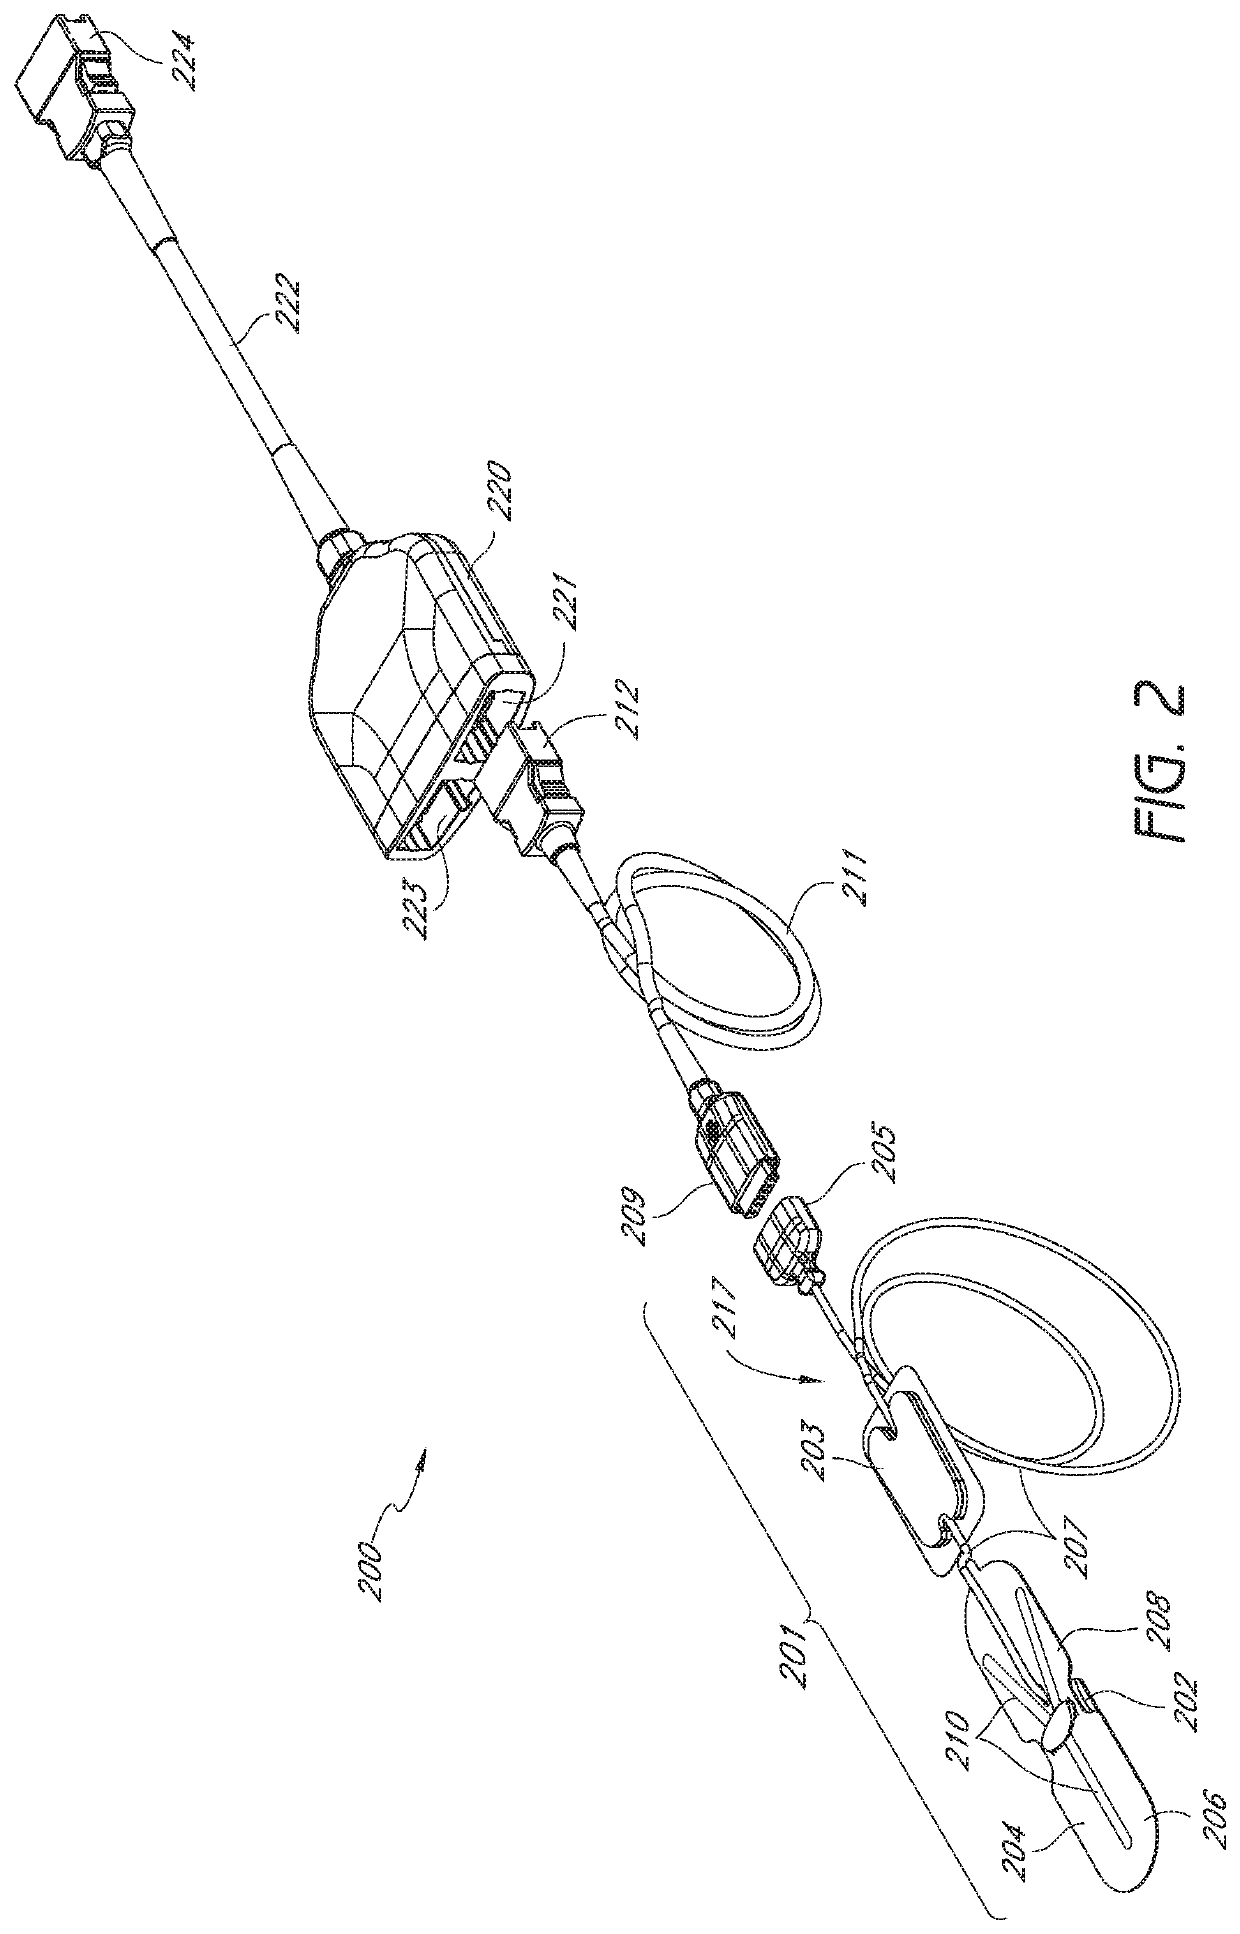 Acoustic respiratory monitoring systems and methods